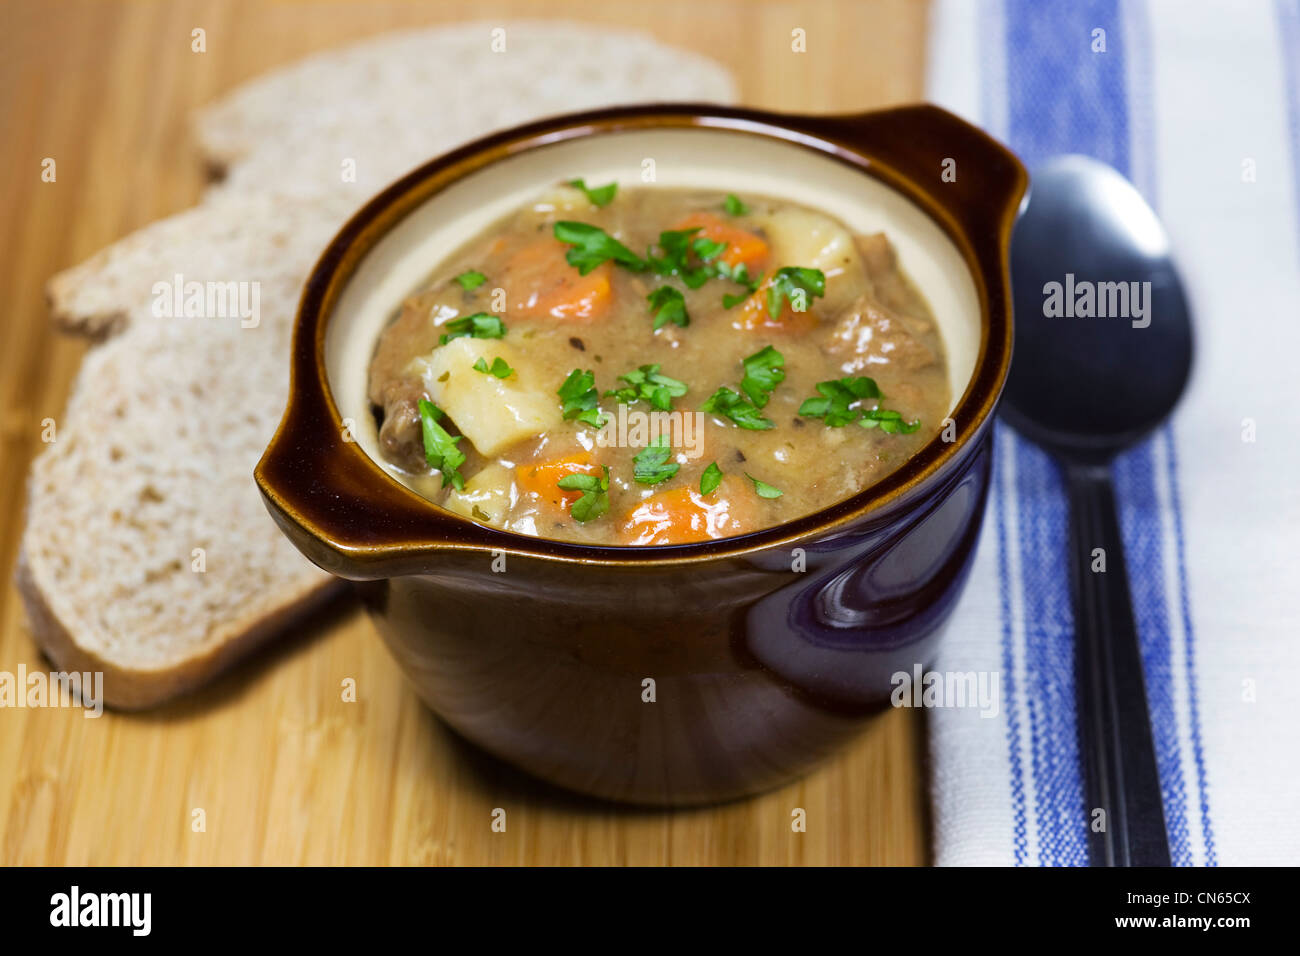 A bowl of chicken soup and a slice of wholemeal bread on a bamboo board. Stock Photo